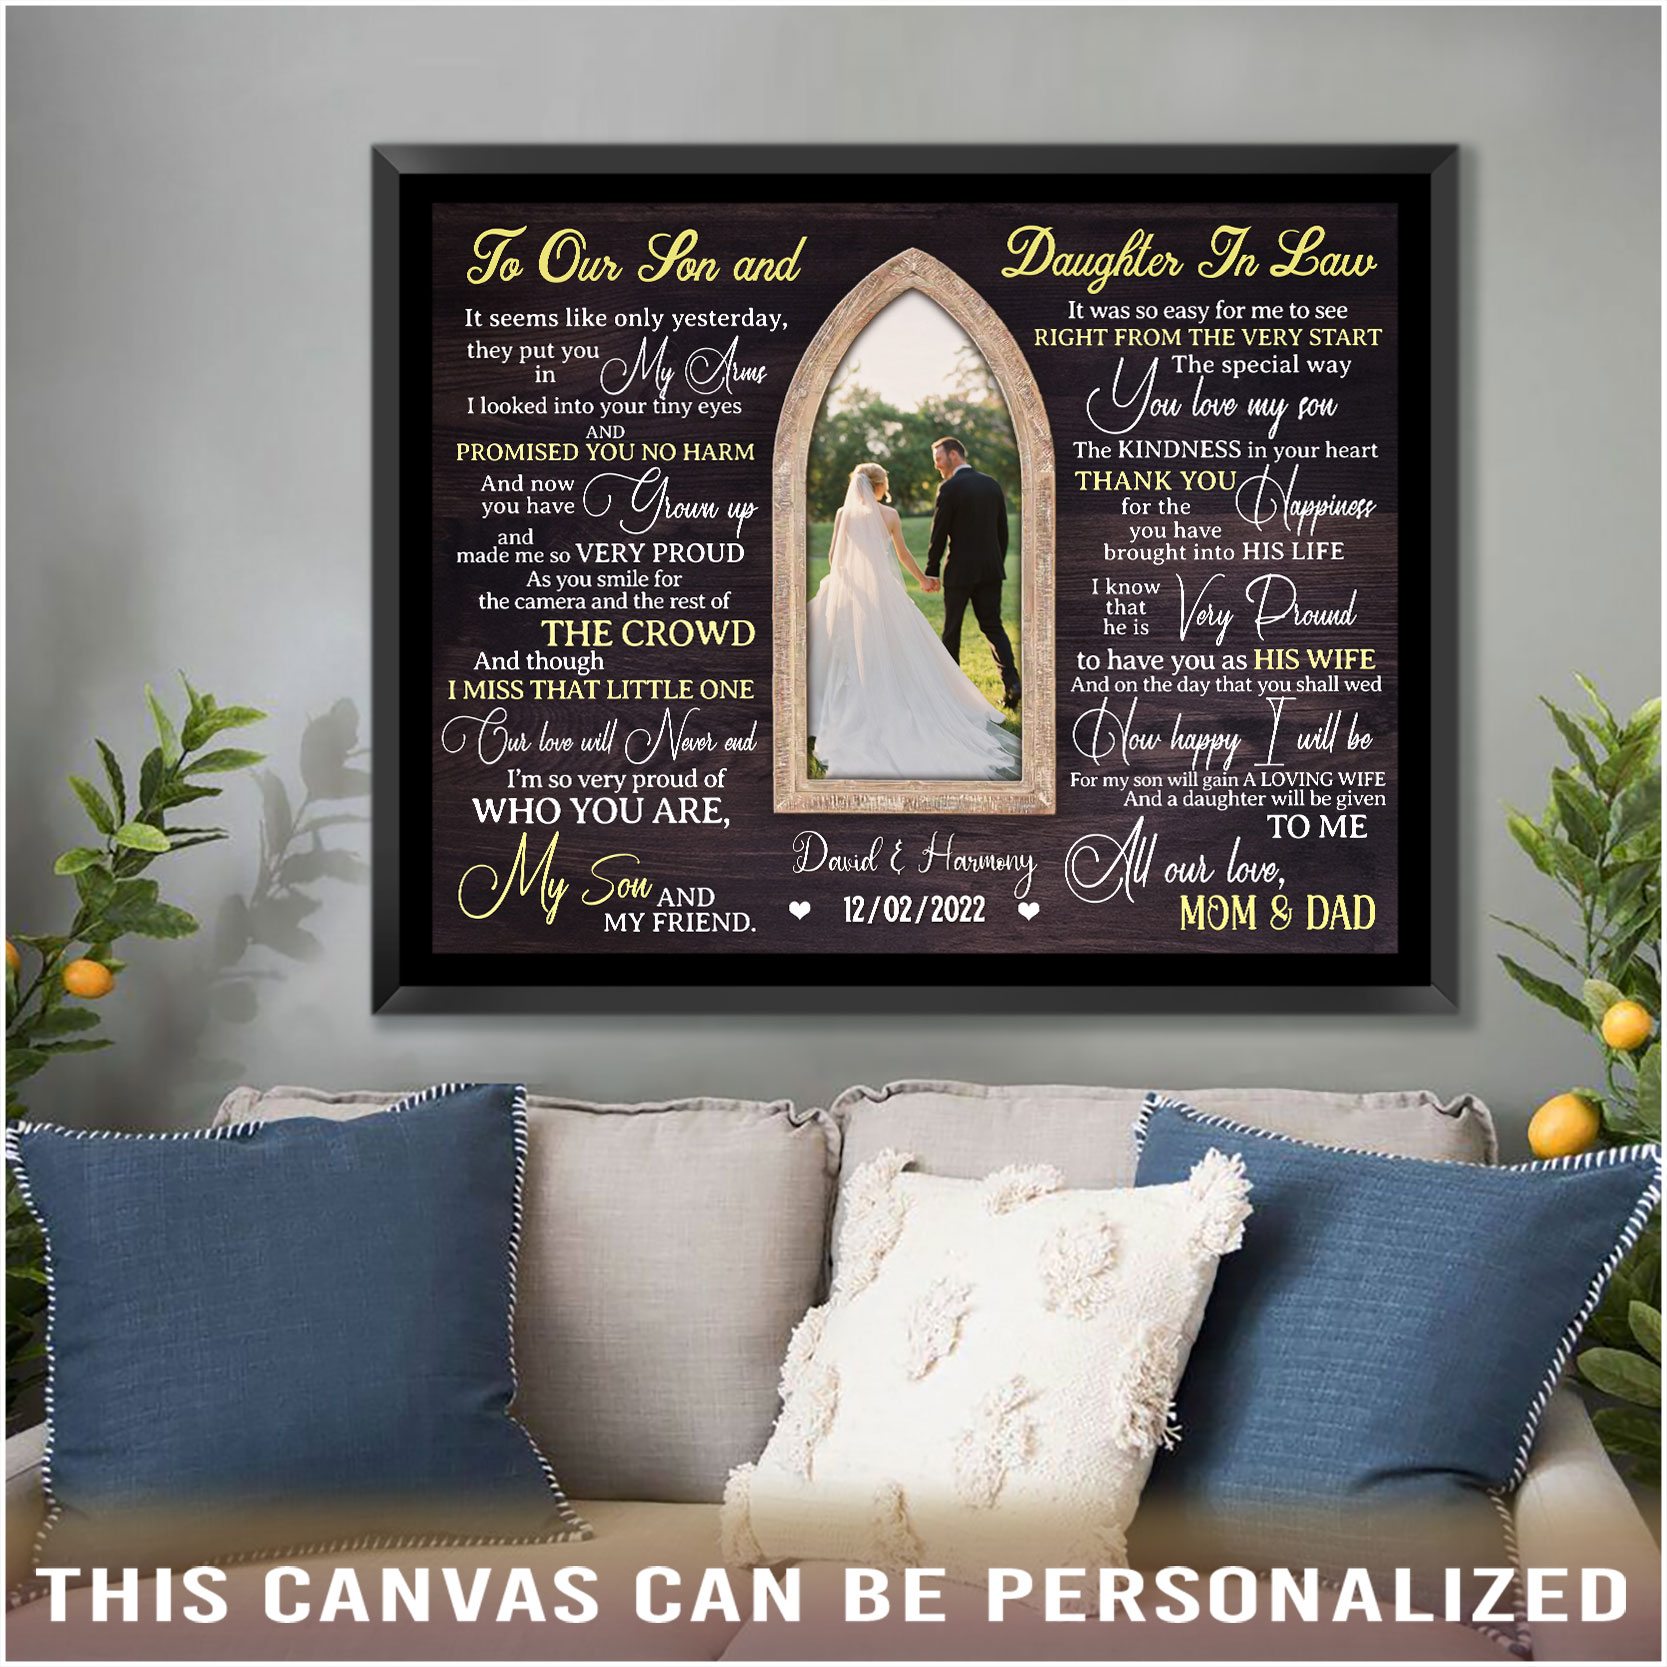 The Son I Found in You, Gift for Son-in-Law, Wedding Gift for New Son The Groom from Mother in Law, Picture Frame, 6397ch, Size: 8x8 with Picture